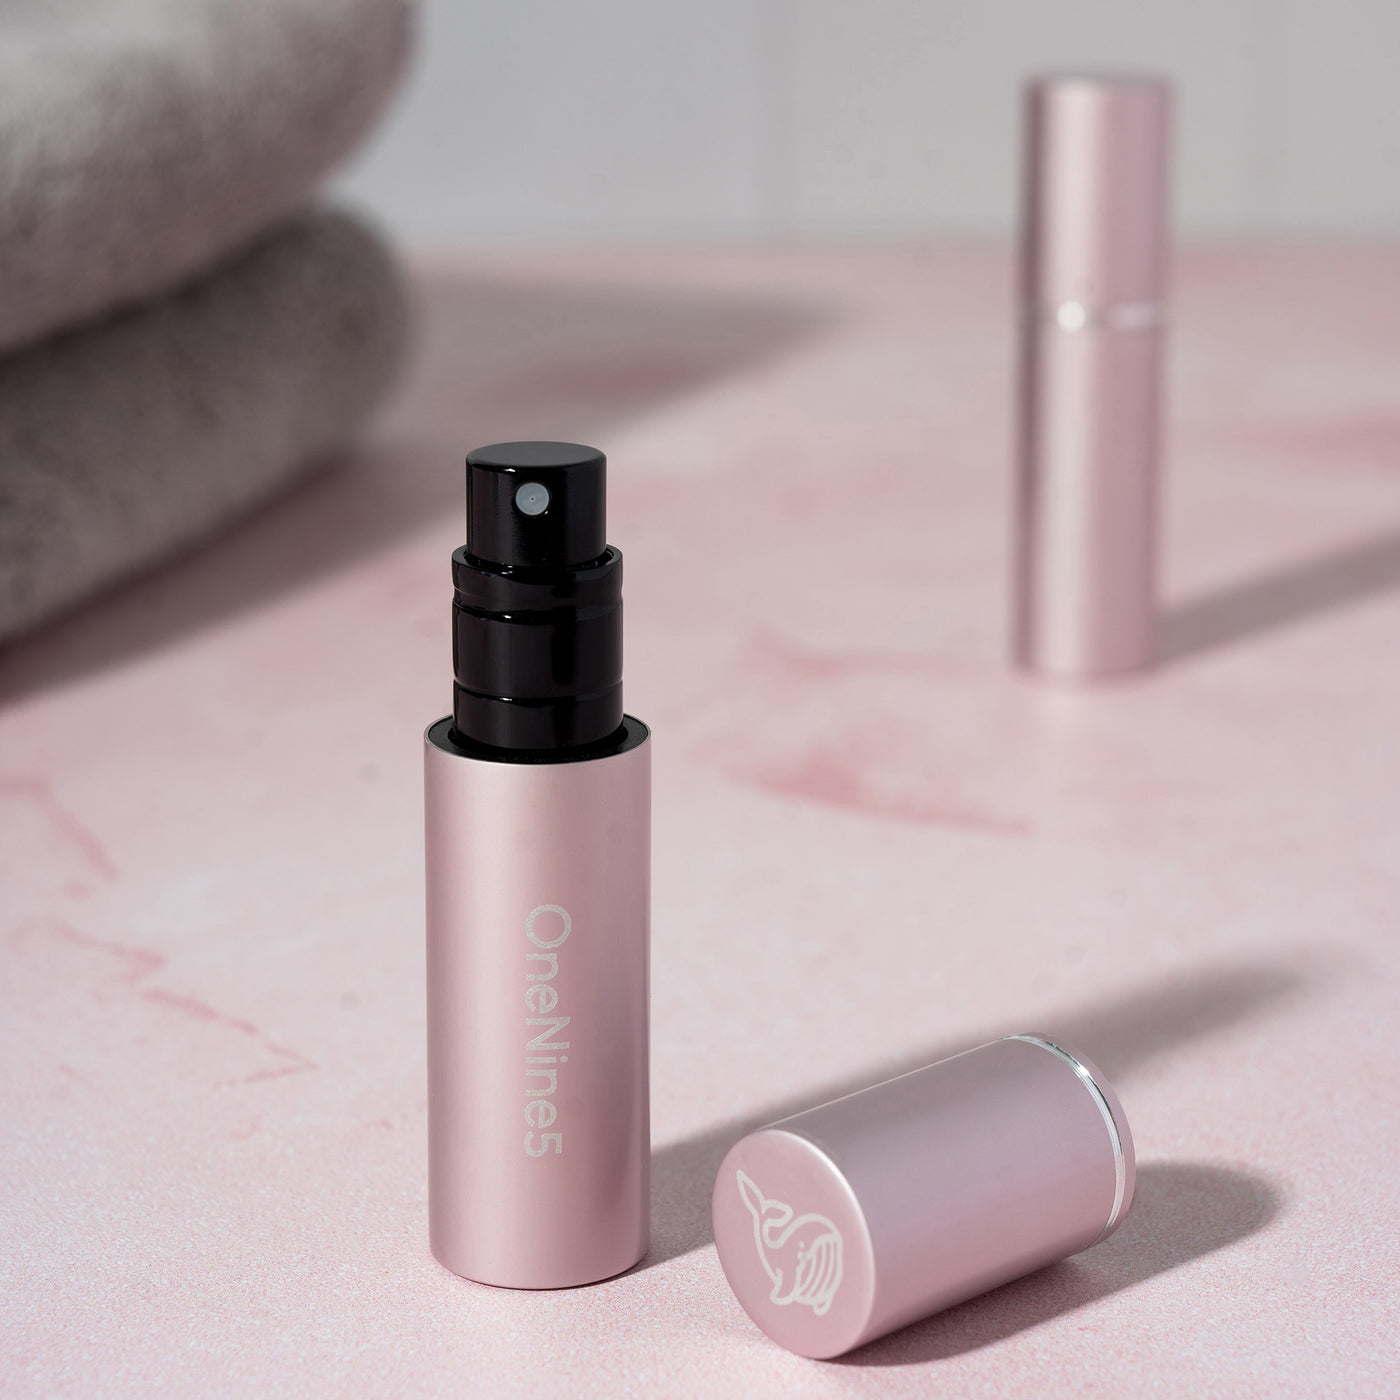 OneNine5 pink travel friendly fragrance bottle, with the magnetic lid removed and the pump visible